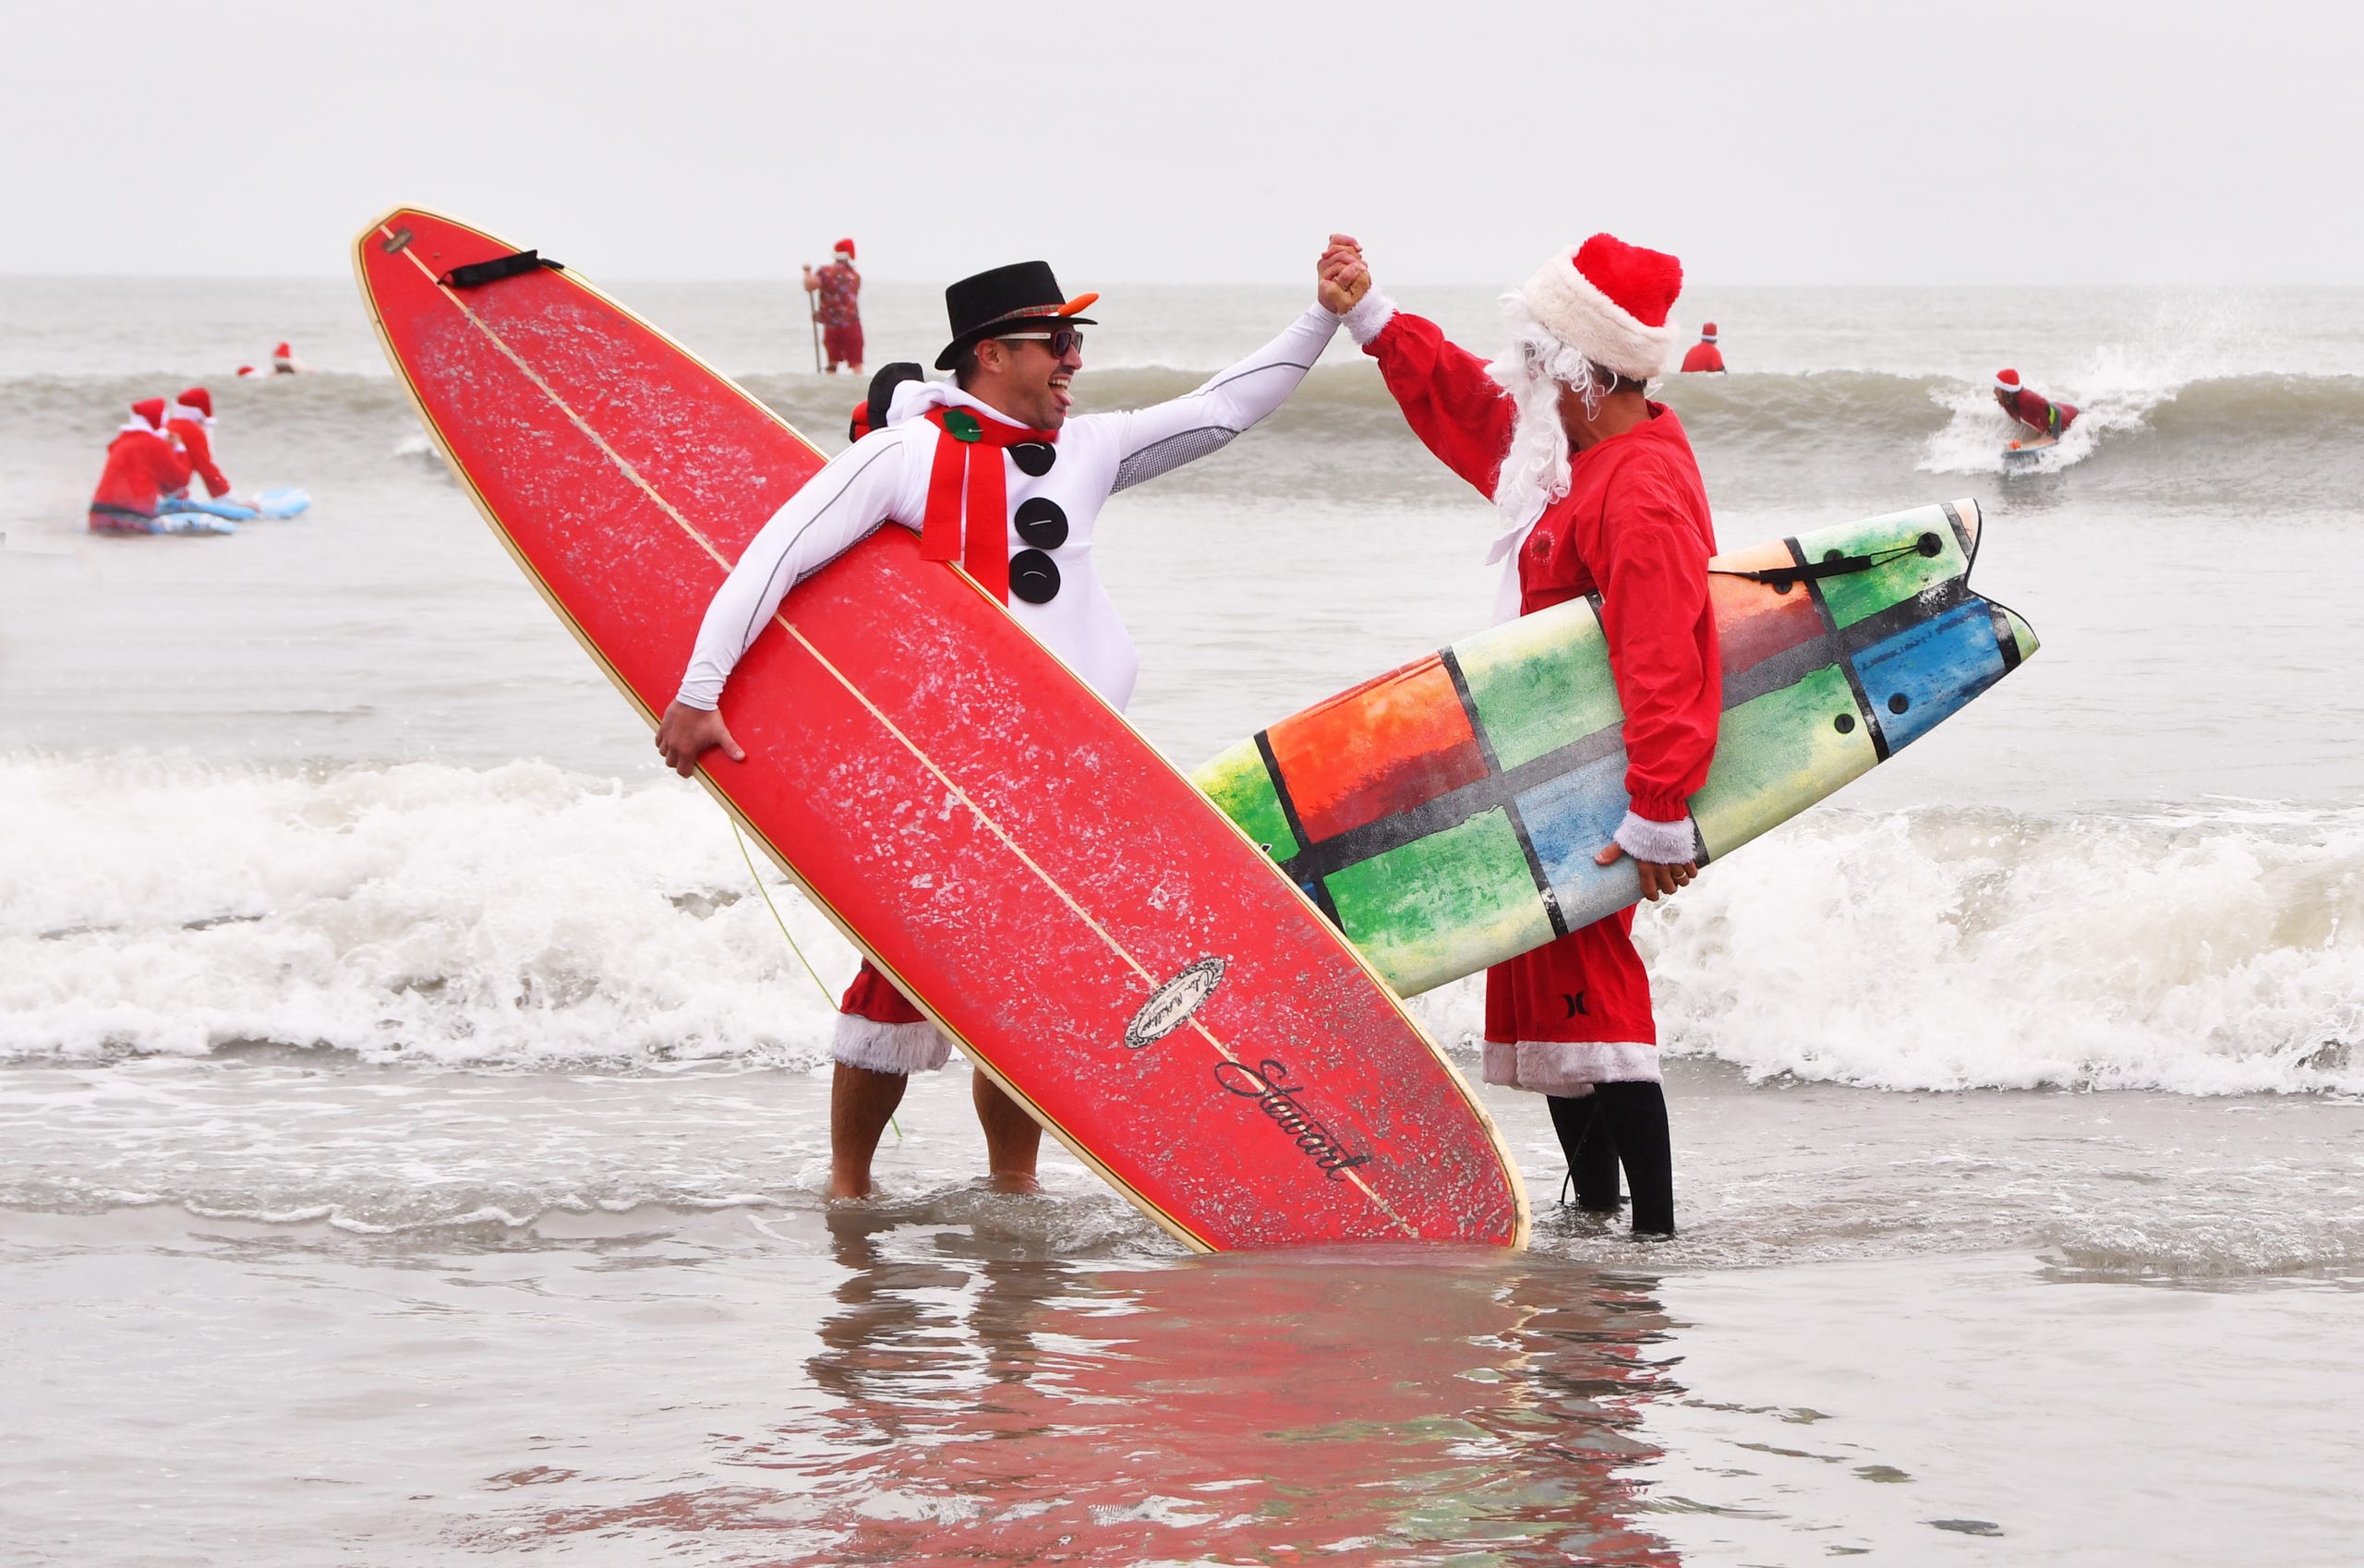 George Trosset Jr. and George Trosset, the two that started it all, high five each other. Thousands turned out to watch hundreds of Surfing Santas catch some waves in Cocoa Beach for the 10th annual Surfing Santas  event Tuesday morning. 10 years ago  George Trosset, his son George Jr. and his daughter-in-law went surfing in Santa and Christmas costumes behind their house on Christmas Eve.  The event has grown and now raises money for two local non profits - Grind for Life, which helps with financial assistance for cancer patients, and the Florida Surf Museum.